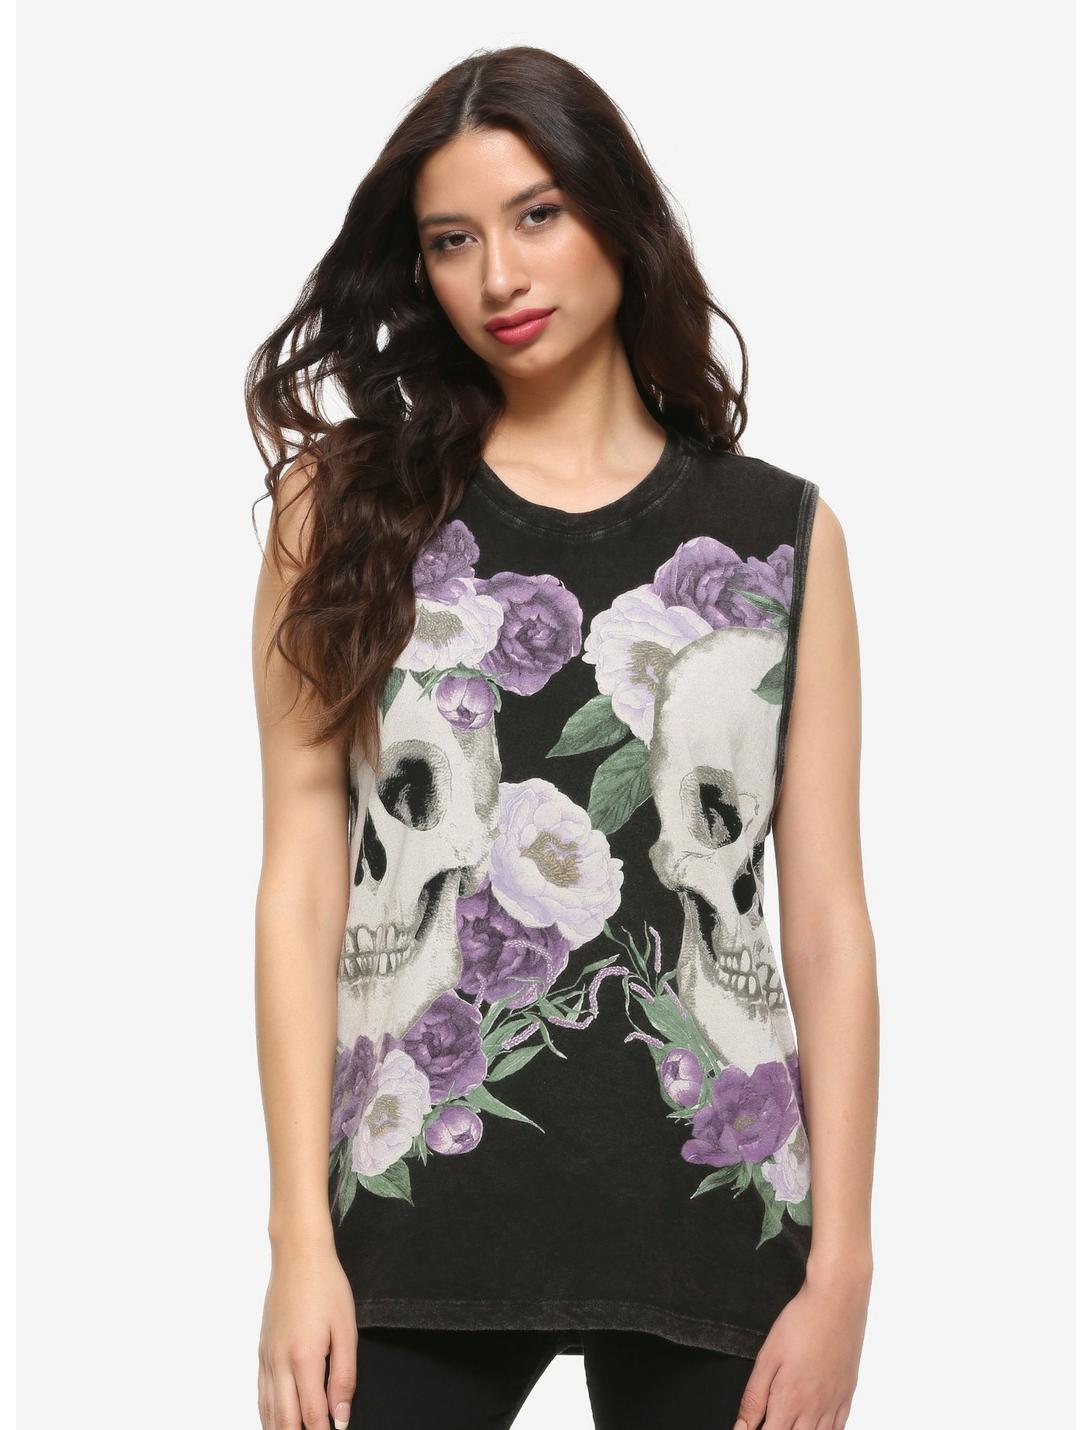 Double Skulls & Floral Girls Muscle Top, MULTI, hi-res